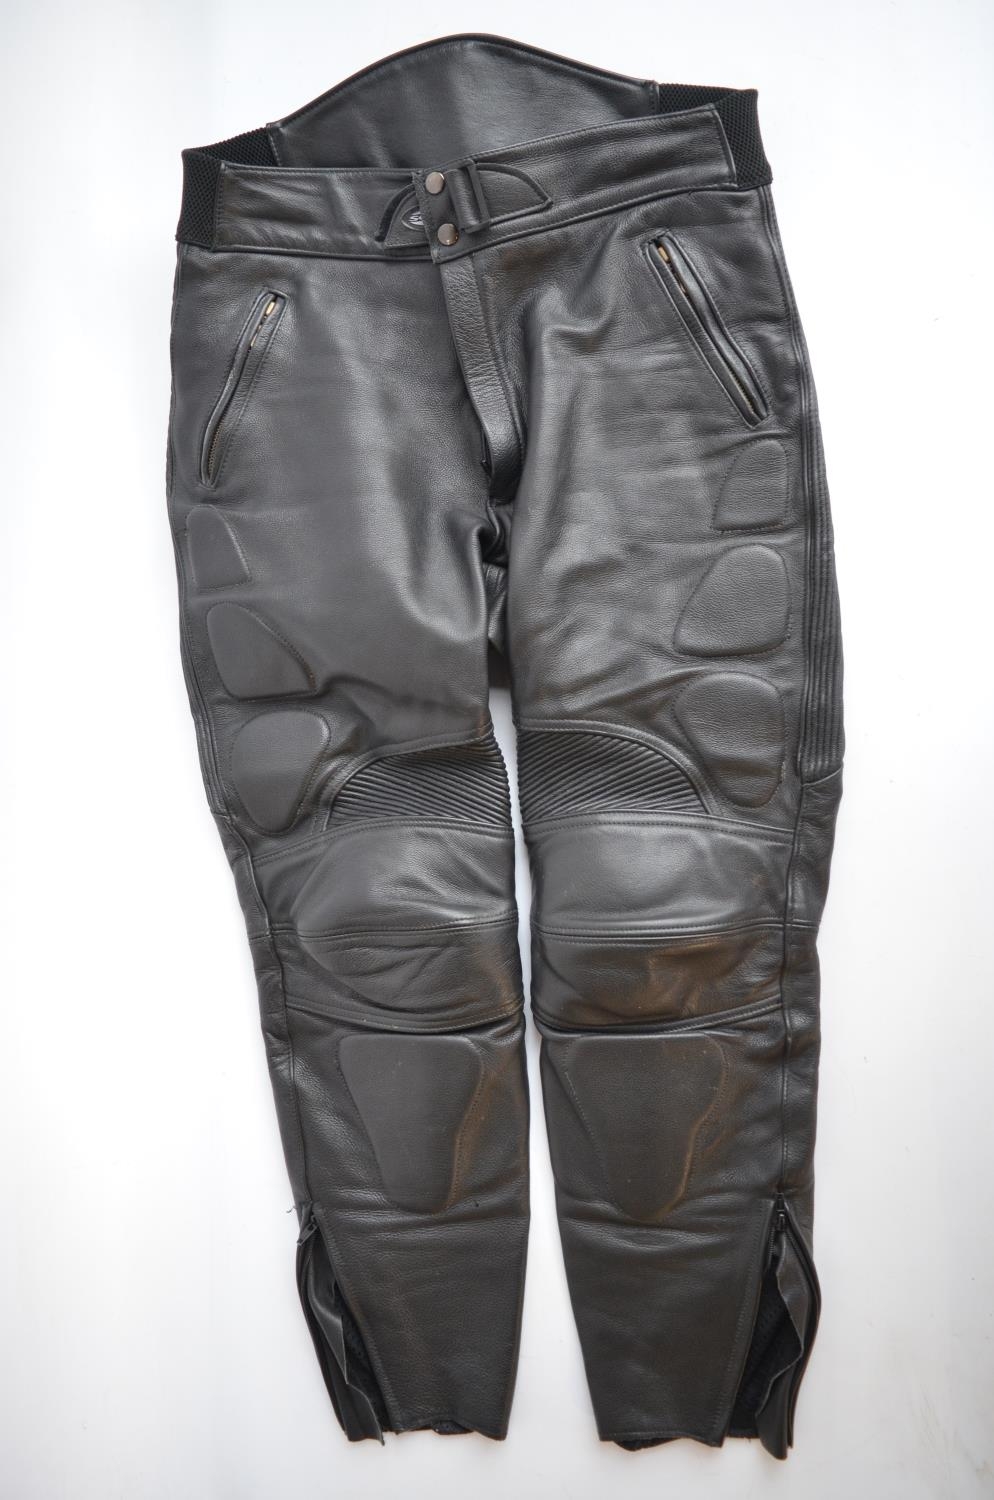 Bikers armoured jacket and trousers by Scott Leathers, jacket with detachable inner liner, no size - Image 4 of 5